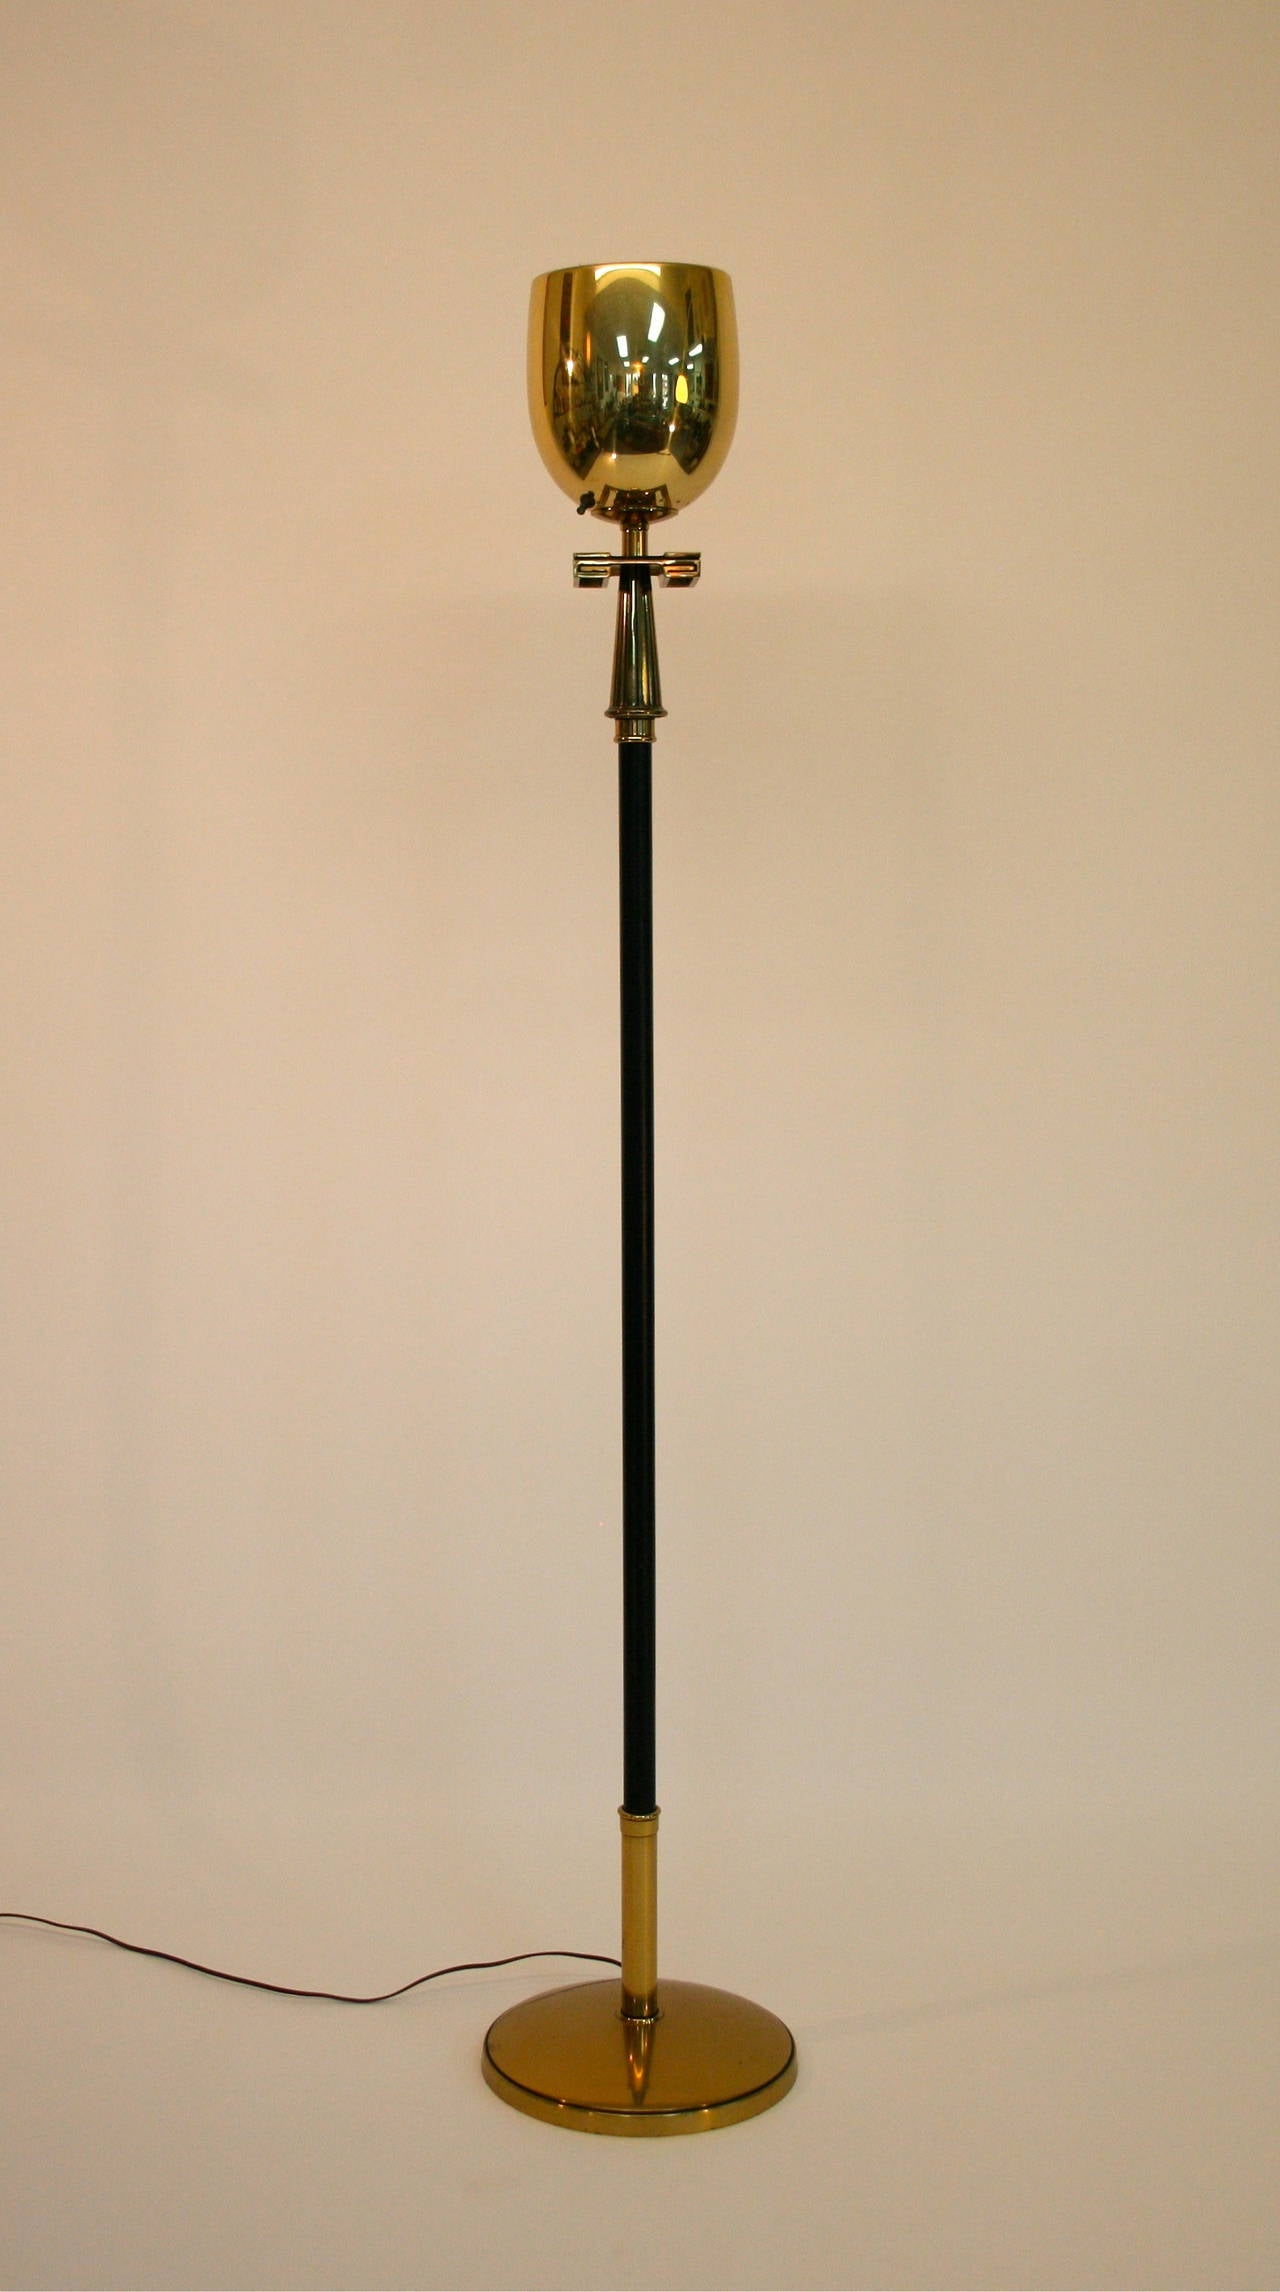 Brass Greek Key Floor Lamp by Stiffel.  Turns on/off by pulling down on the lamp shaft.  Circa 1950's.